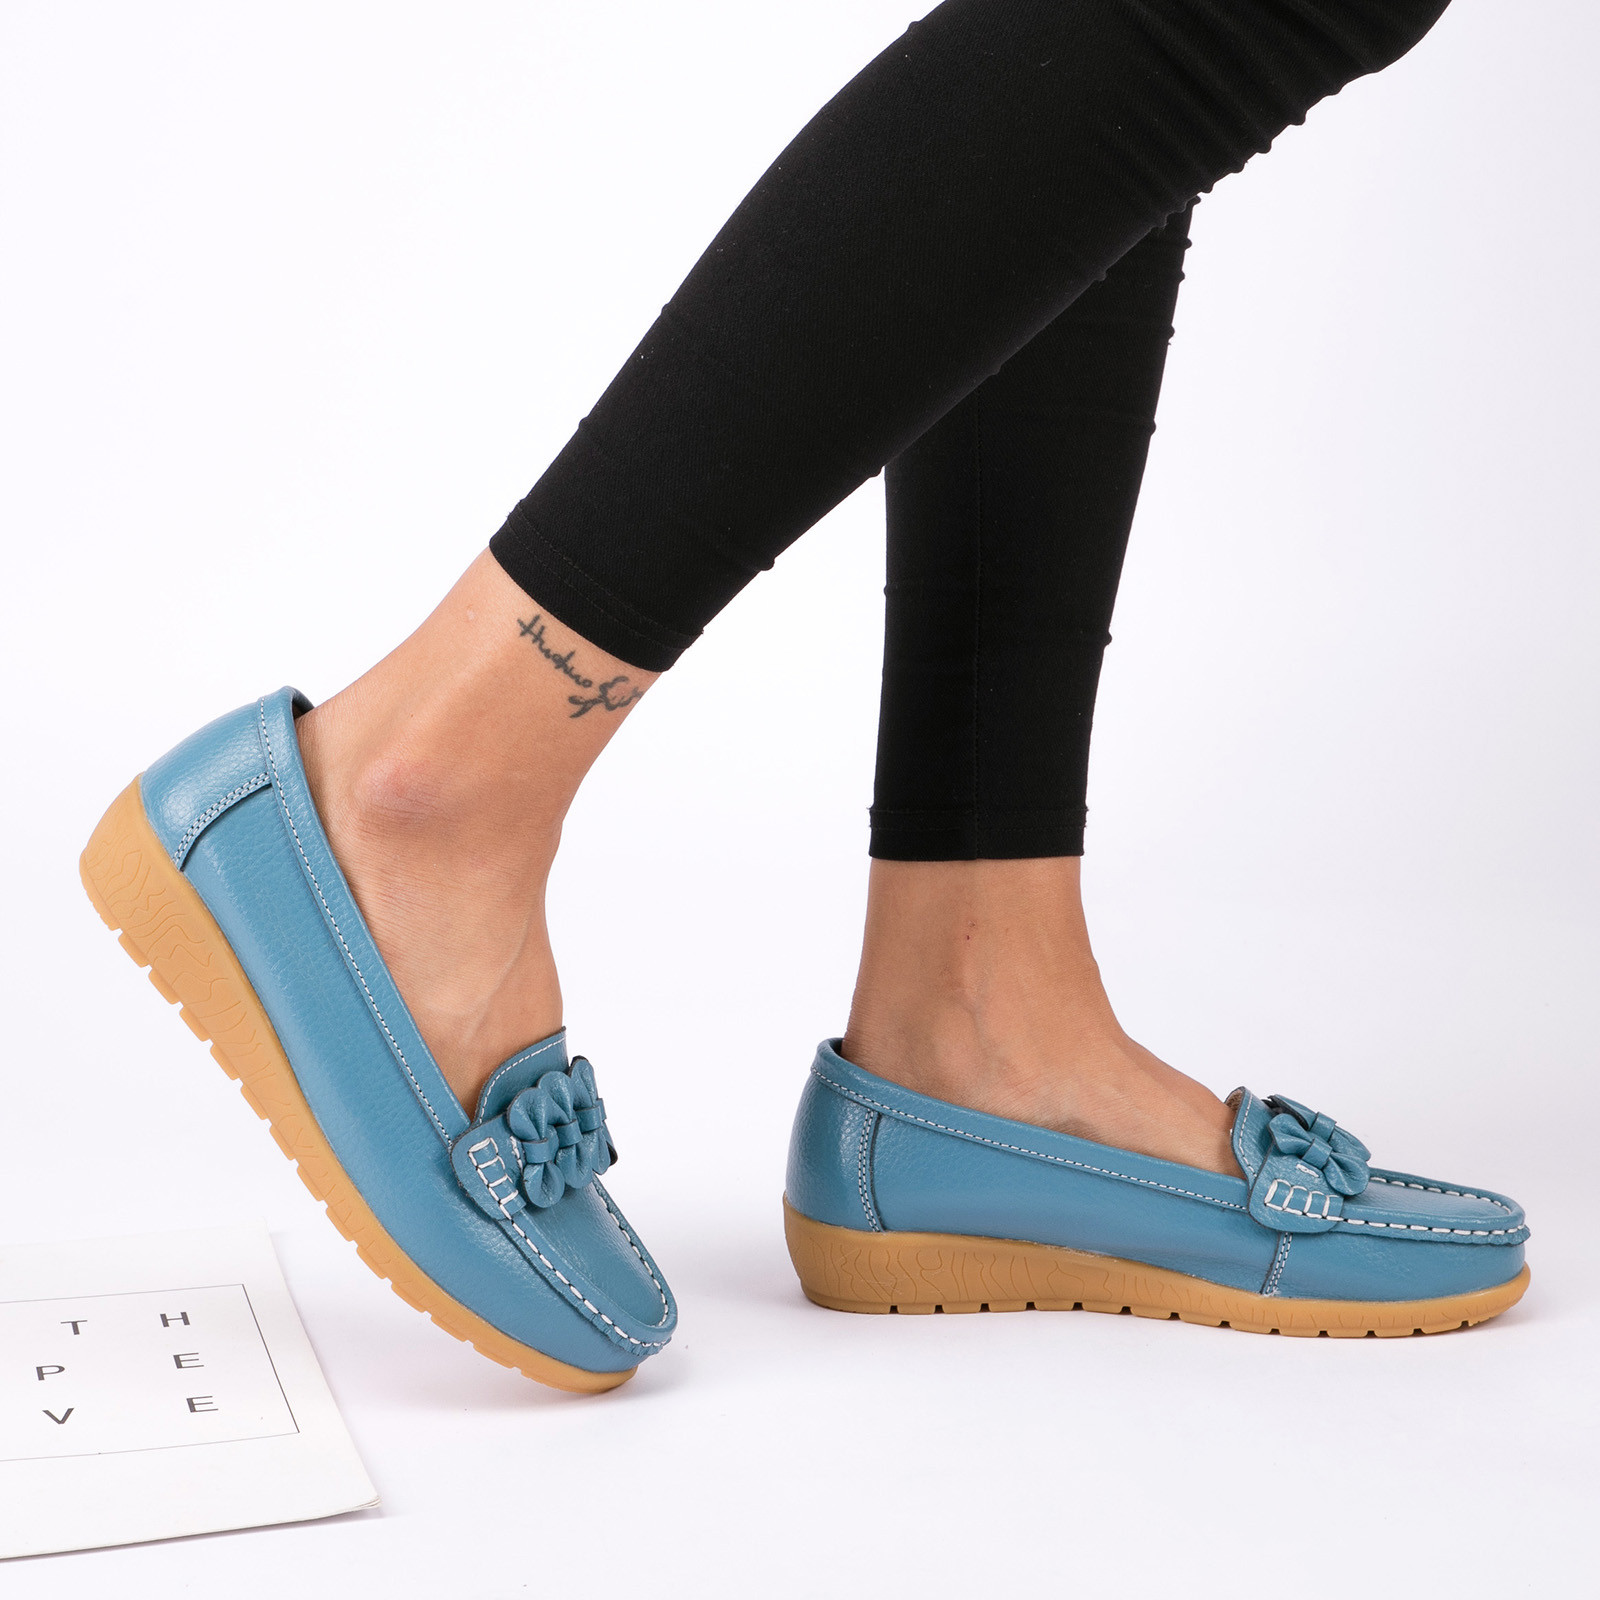 adviicd Tennis Shoes Womens Women'S Casual Shoes Women Shoes Fashion Casual Shoes Small Thick Heel Soft Sole Casual Shoes Light Blue 6.5 - image 2 of 5